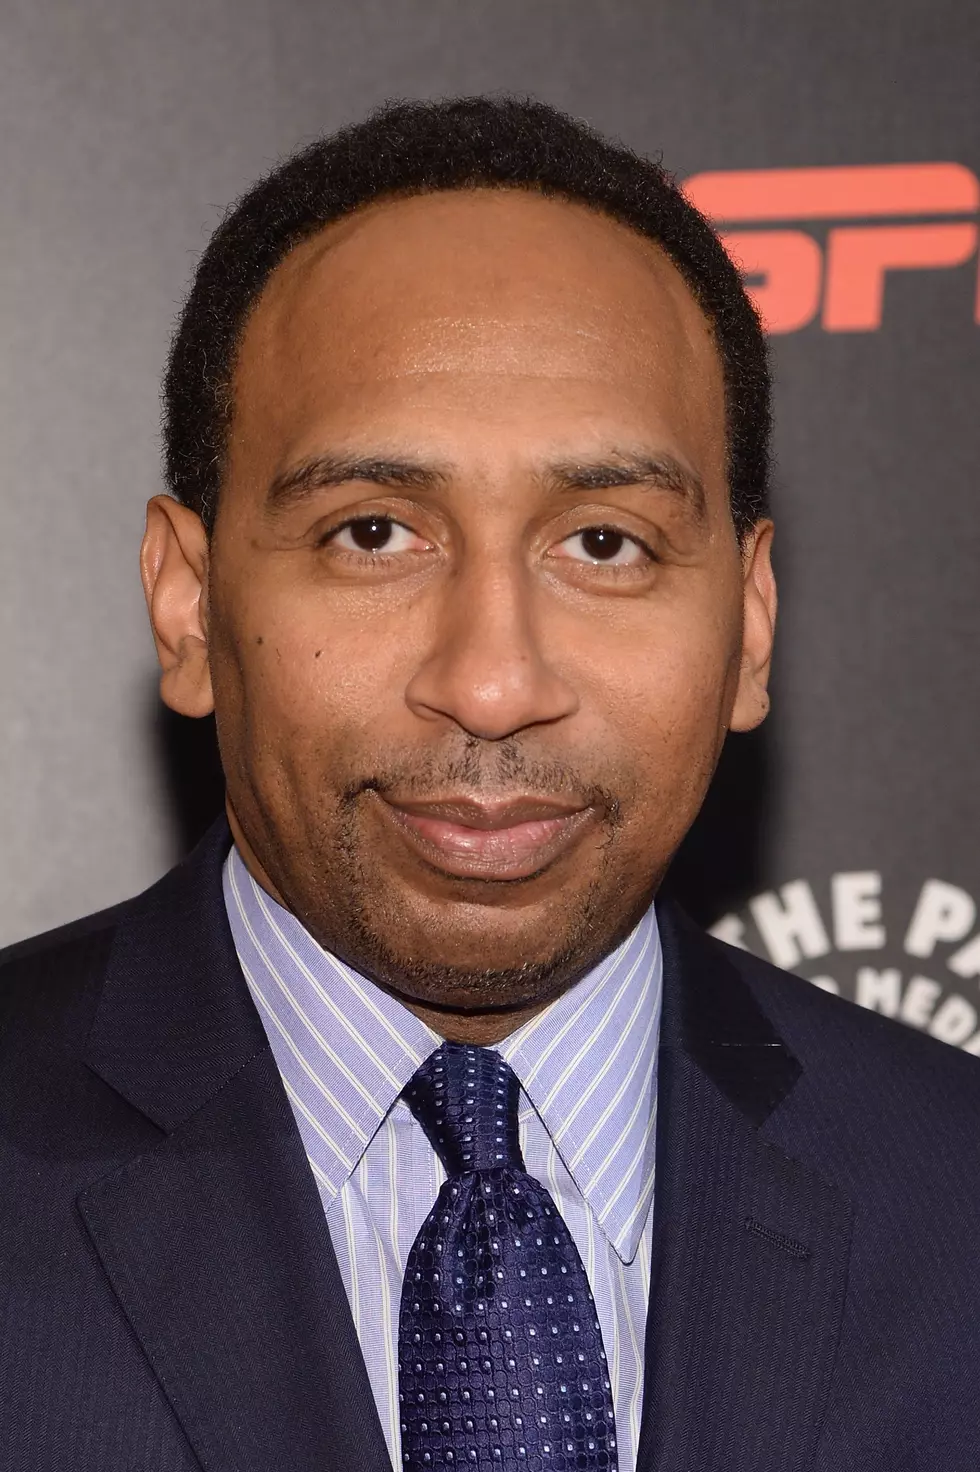 Stephen A Smith on Overtime Discusses if Patriots Win Super Bowl if it's Tarnished?